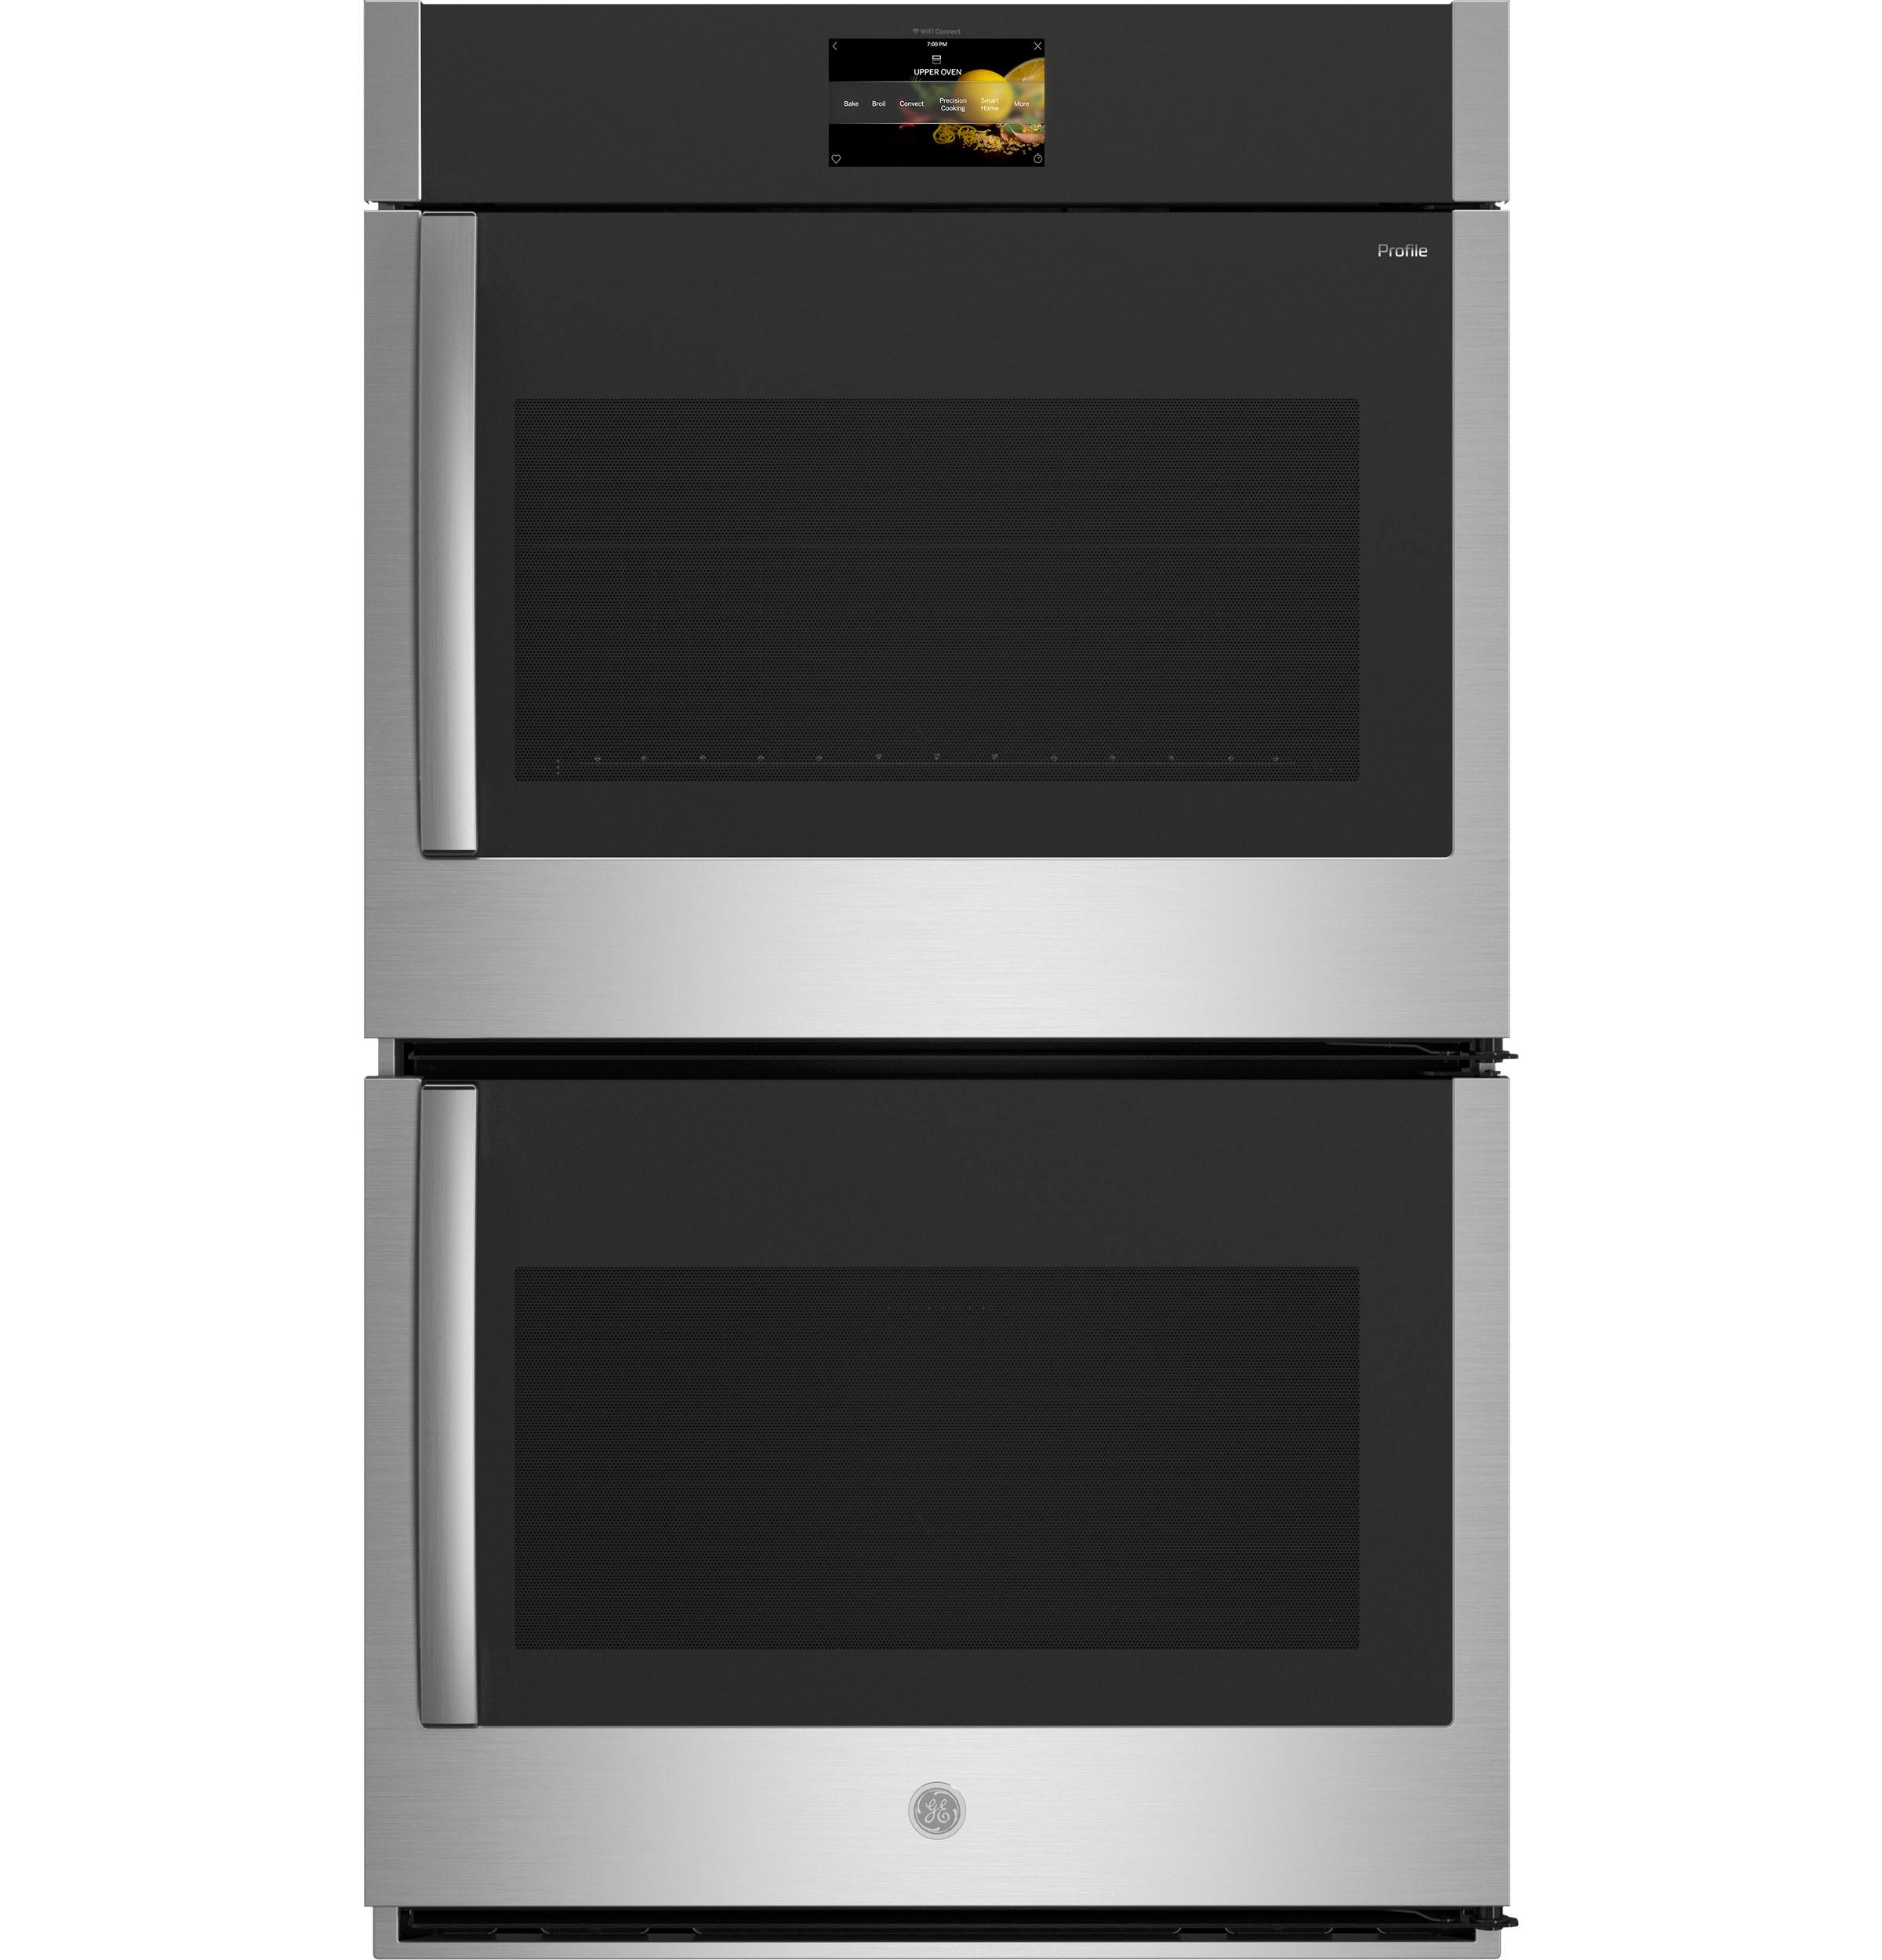 GE Profile™ 30" Smart Built-In Convection Double Wall Oven with Right-Hand Side-Swing Doors